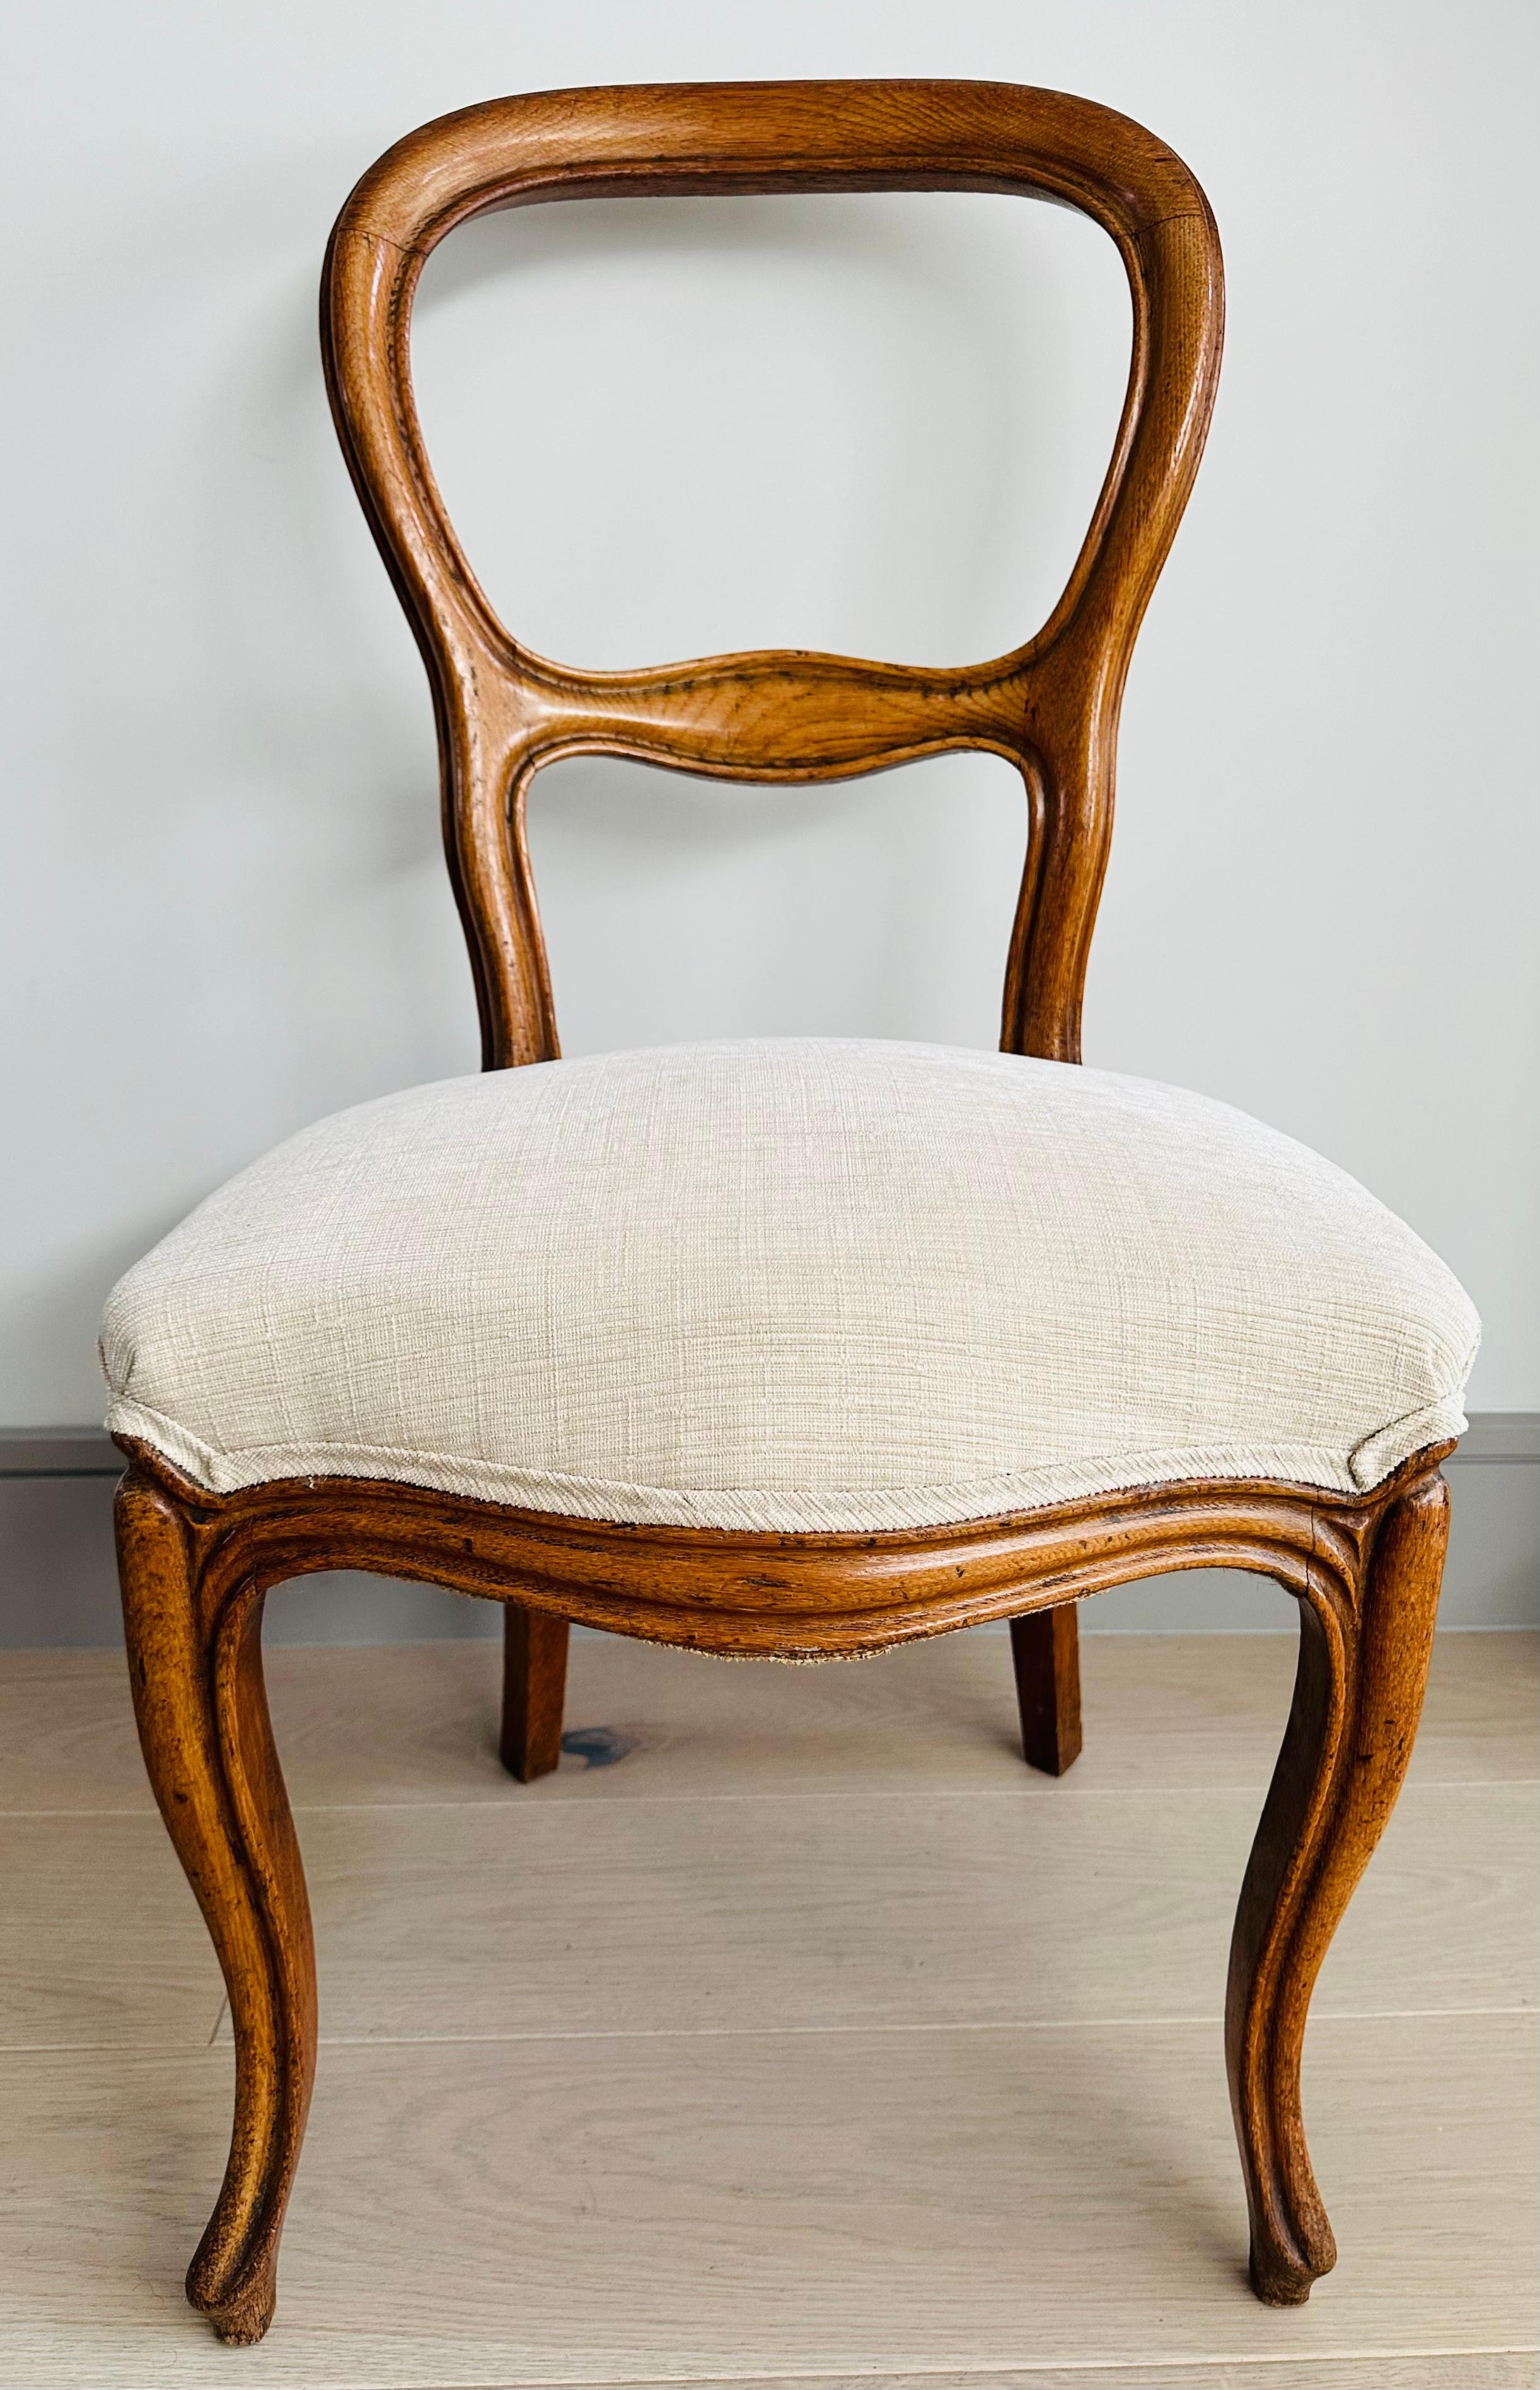 Circa 1900s oak balloon back side or dining chair which is characterised by its distinctive balloon-shaped back and simply carved around its border. The chair has turned legs and a newly reupholstered seat, making it both stylish and